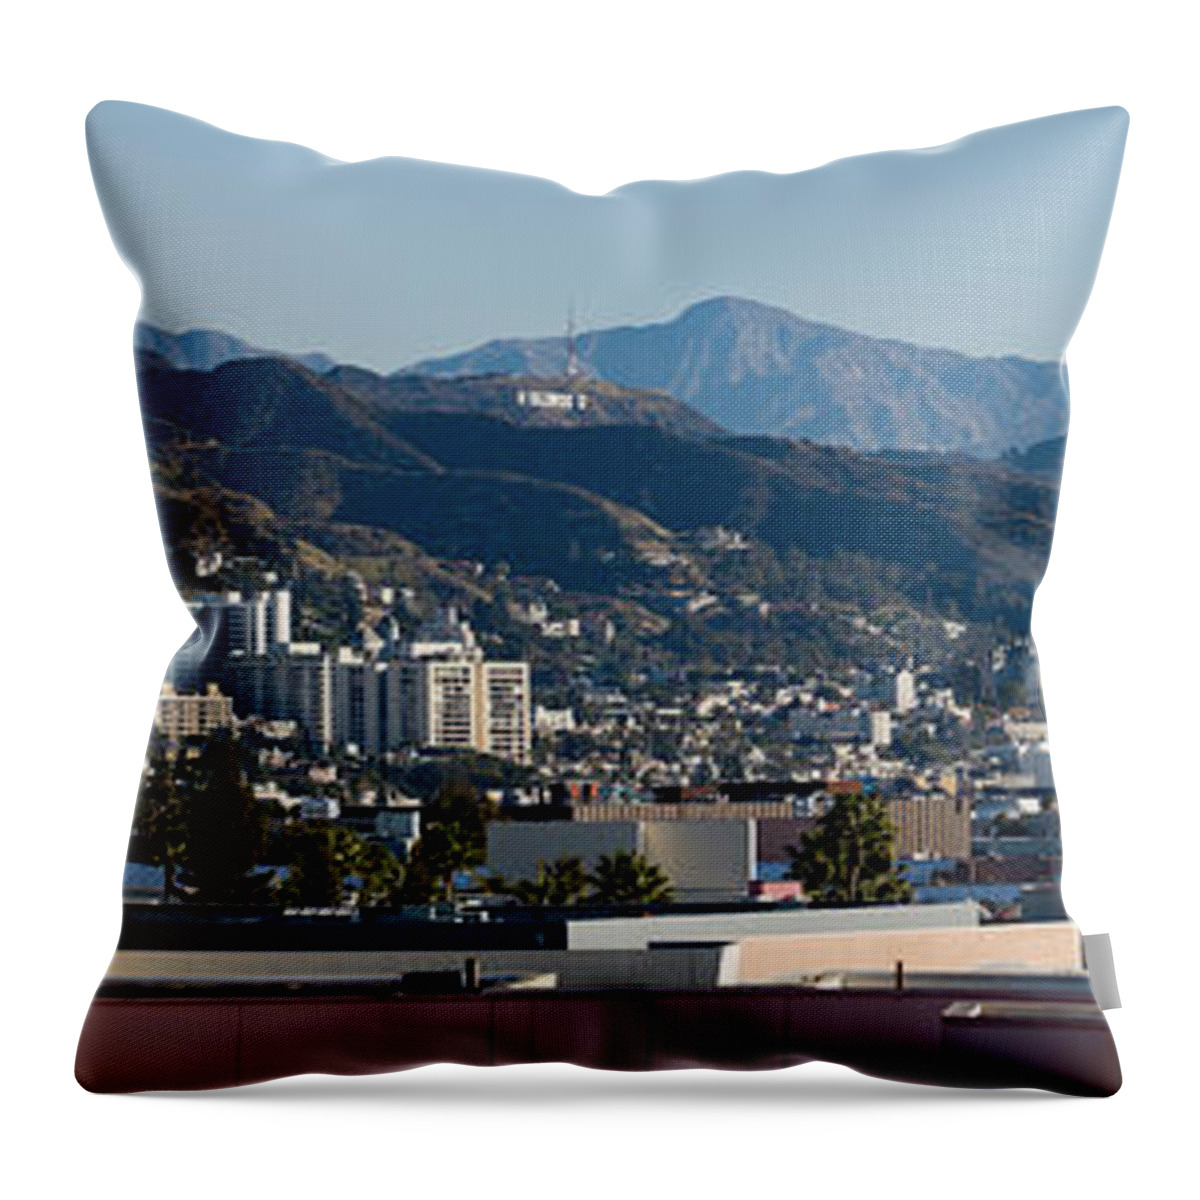 Photography Throw Pillow featuring the photograph High Angle View Of A City, Beverly by Panoramic Images